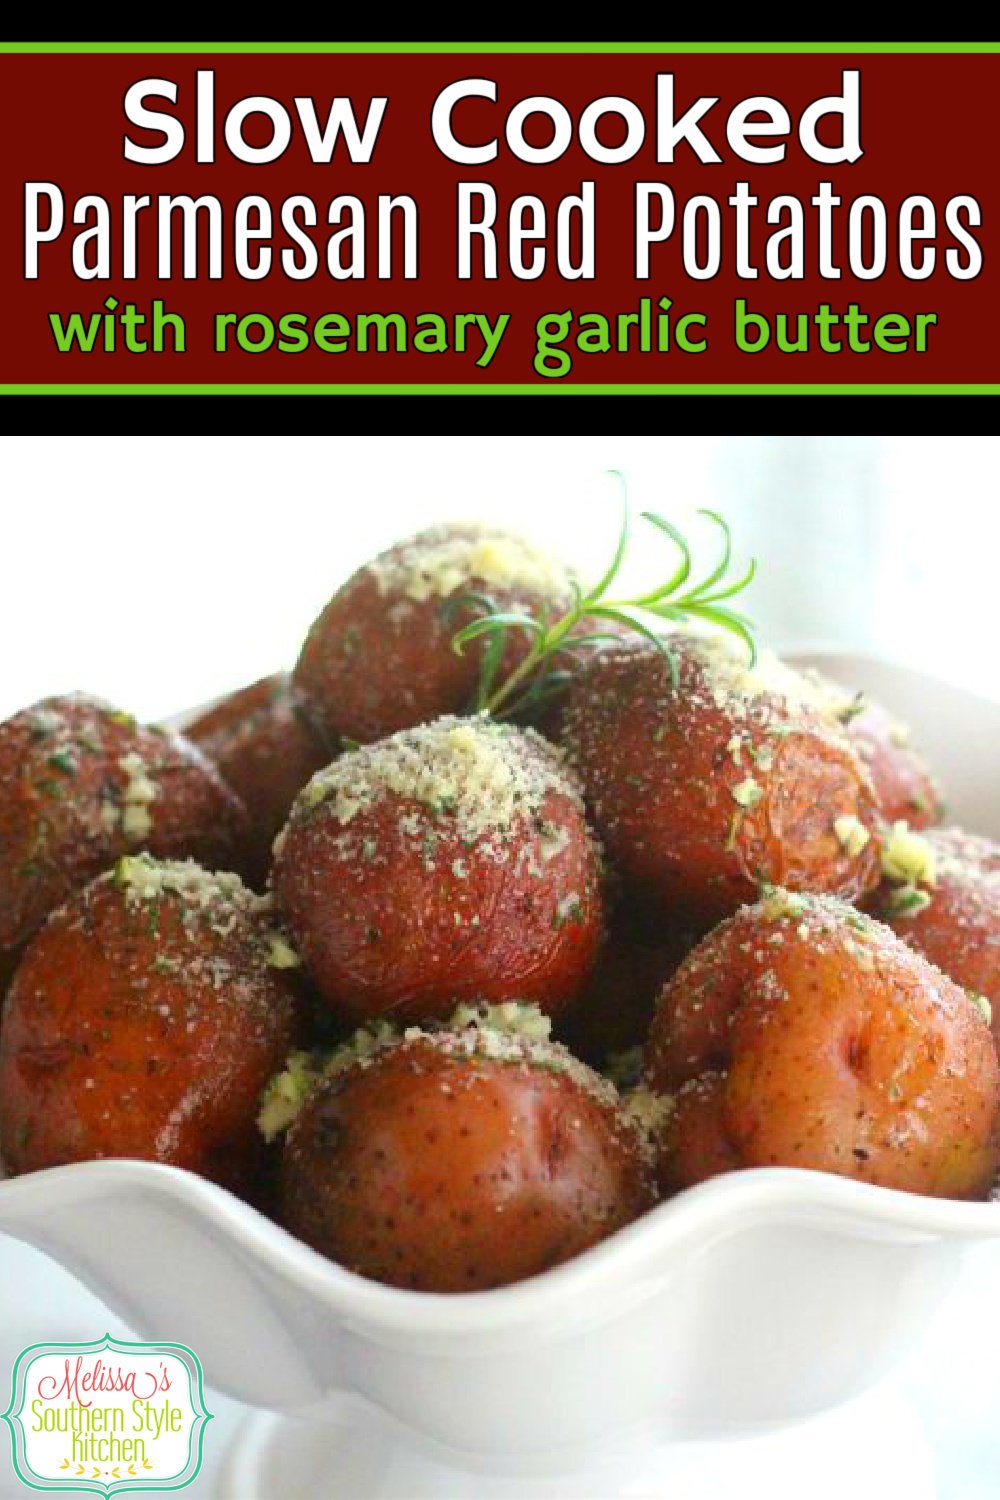 Make these impressive Slow Cooked Parmesan Red Potatoes in a cinch in your slow cooker #slowcookedpotatoes #redpotatoes #easypotatorecipes #redpotatoes #crockpotpotates #rosemarybutter #garlicbutter via @melissasssk